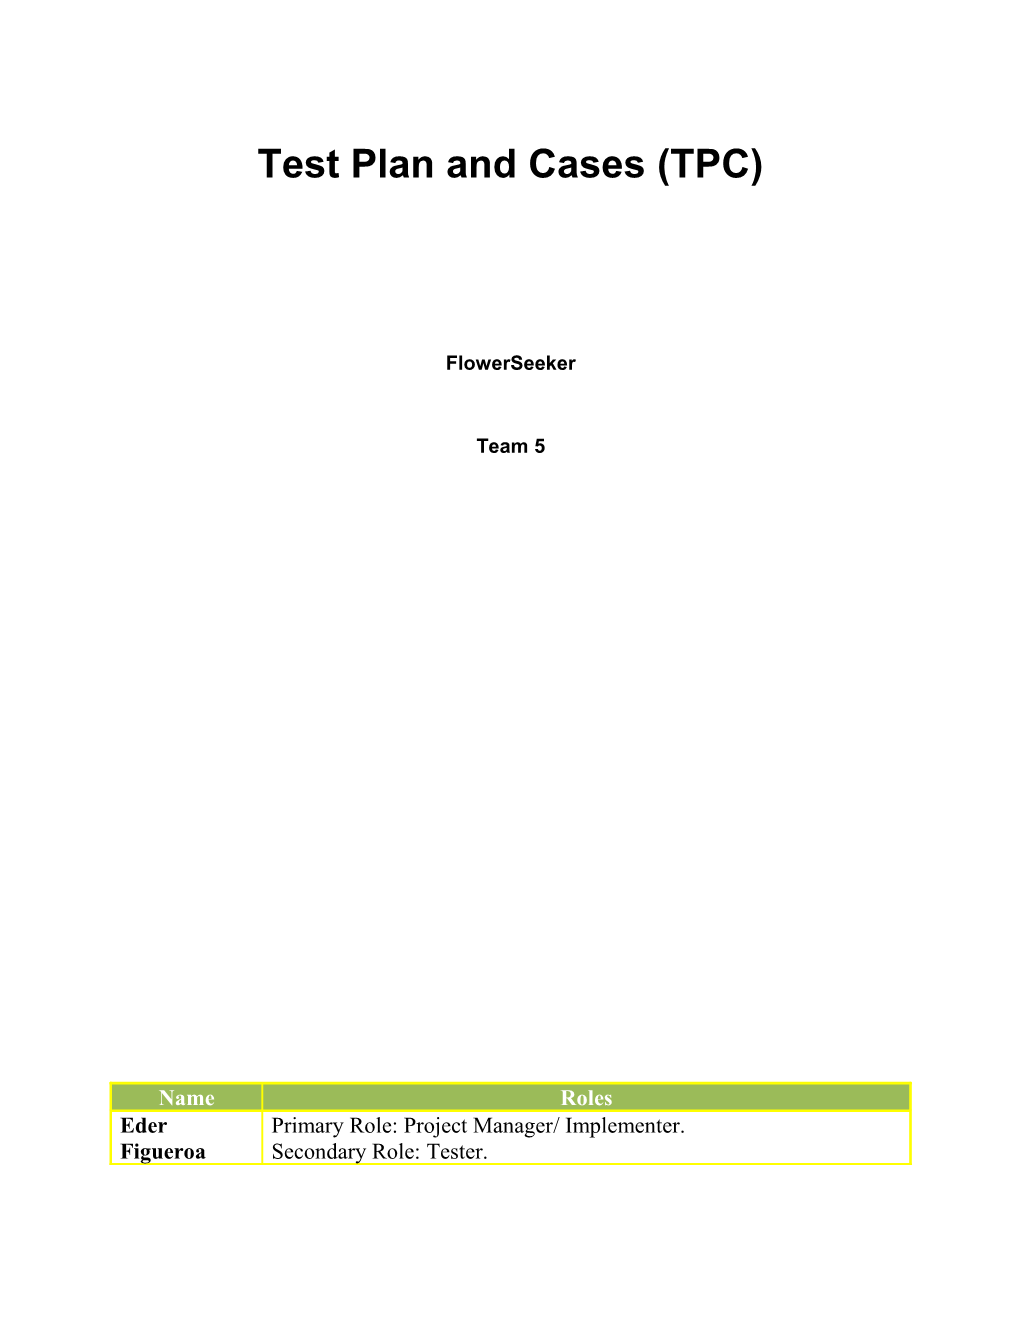 Test Plan and Cases (TPC) s5